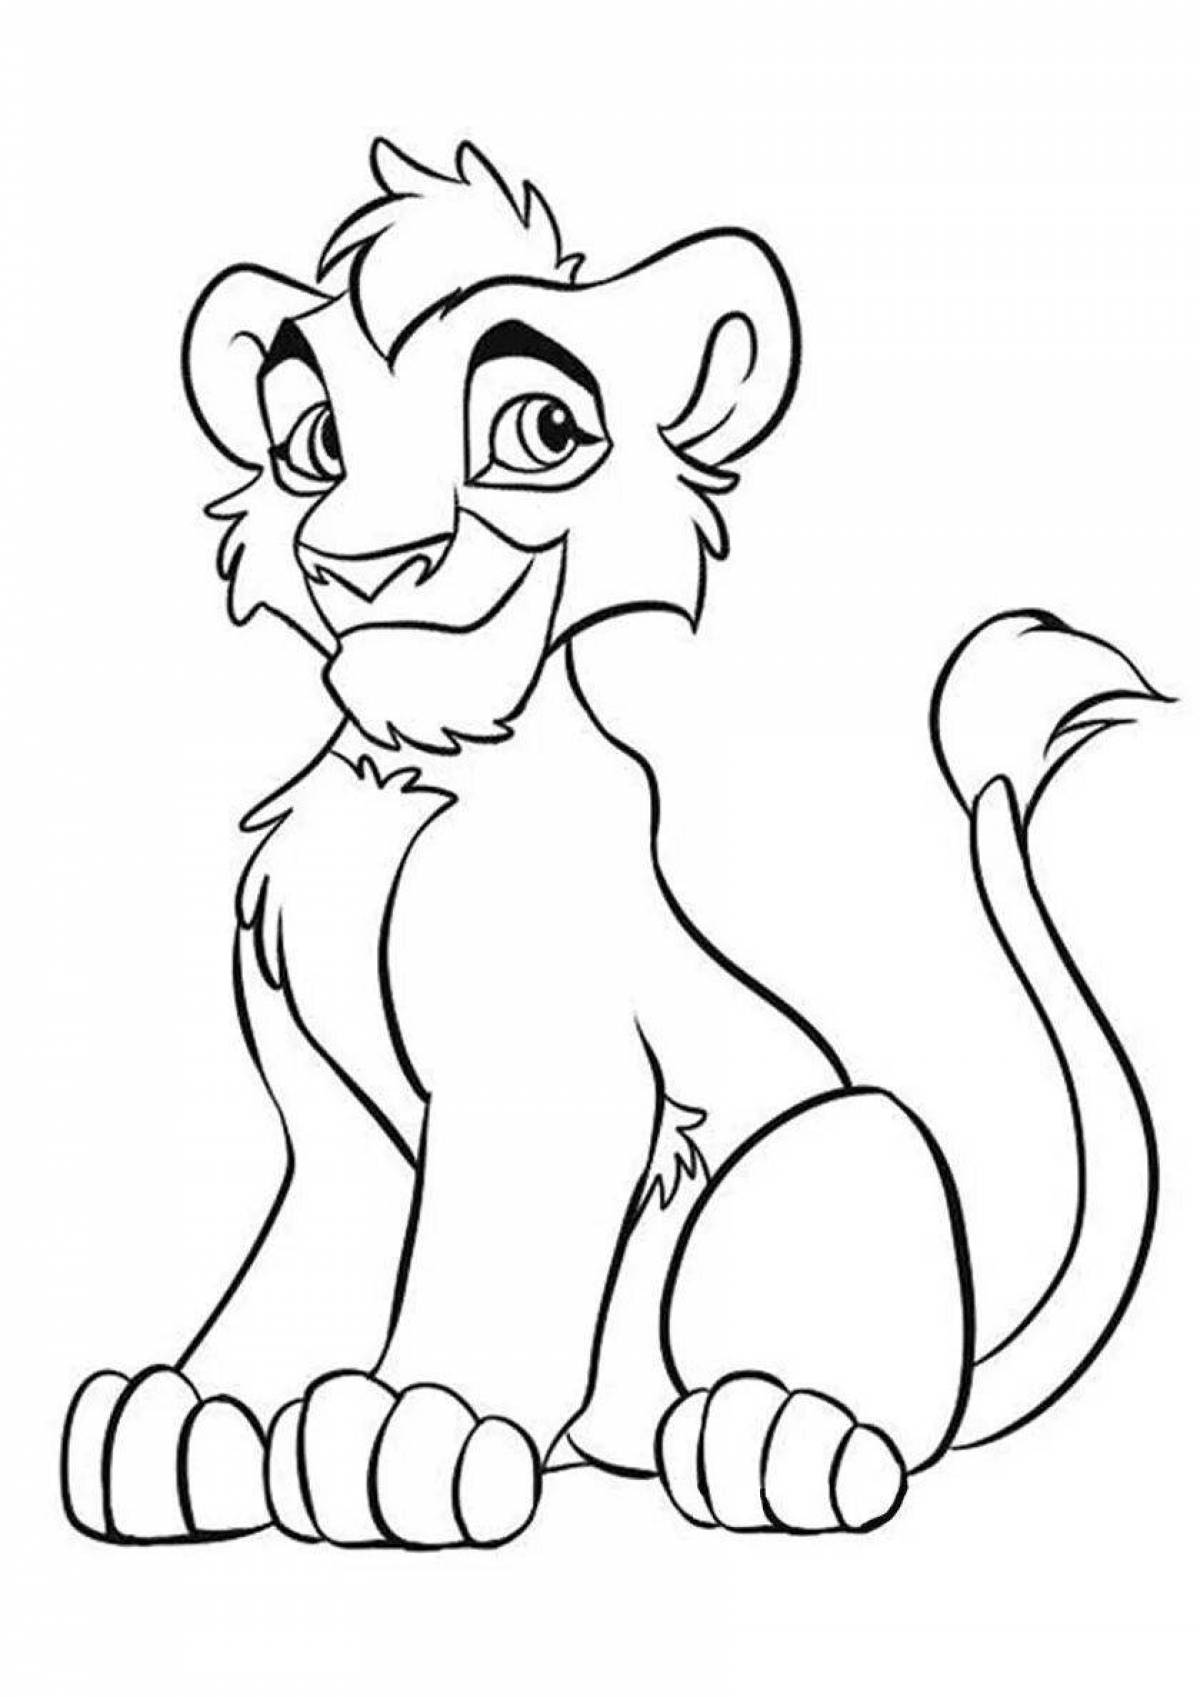 Junior Simba's attractive coloring page